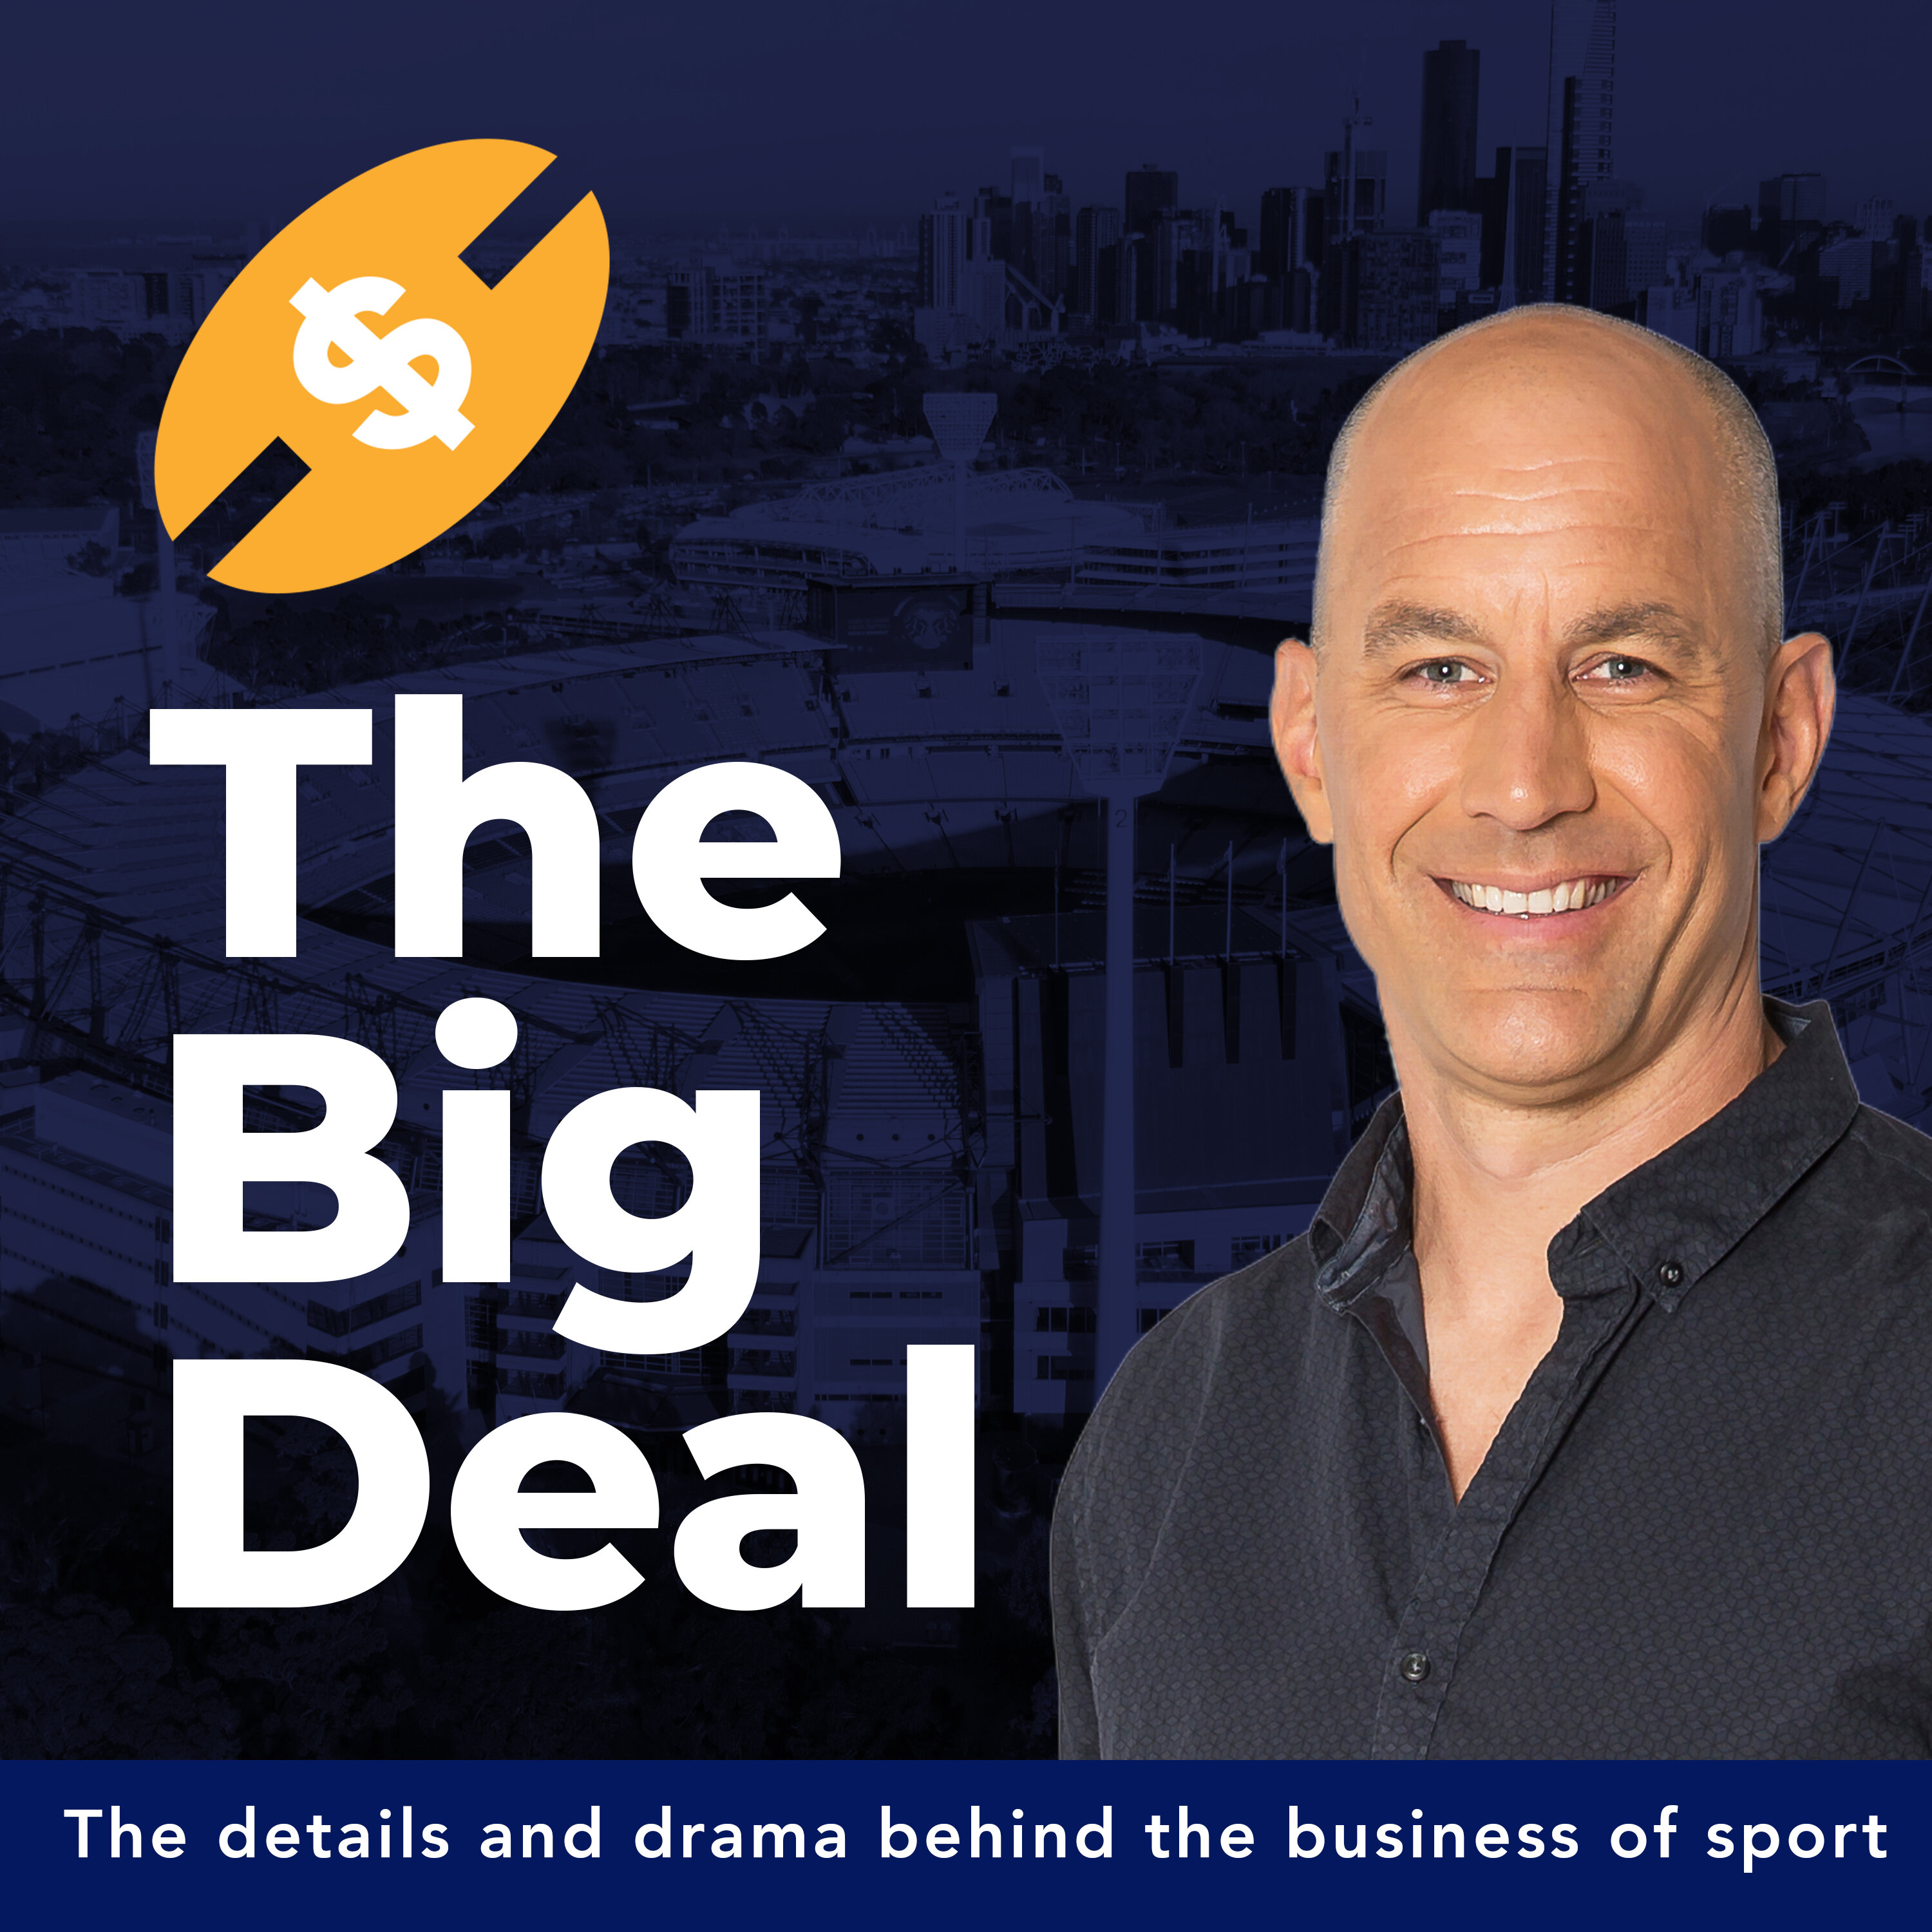 Sports biz wrap: AFL's billion dollar push, MCG turf to be re-laid, the logic of the NRL's Vegas push, Reath's reward, the James family at the Lakers, All-Star all-farce & more